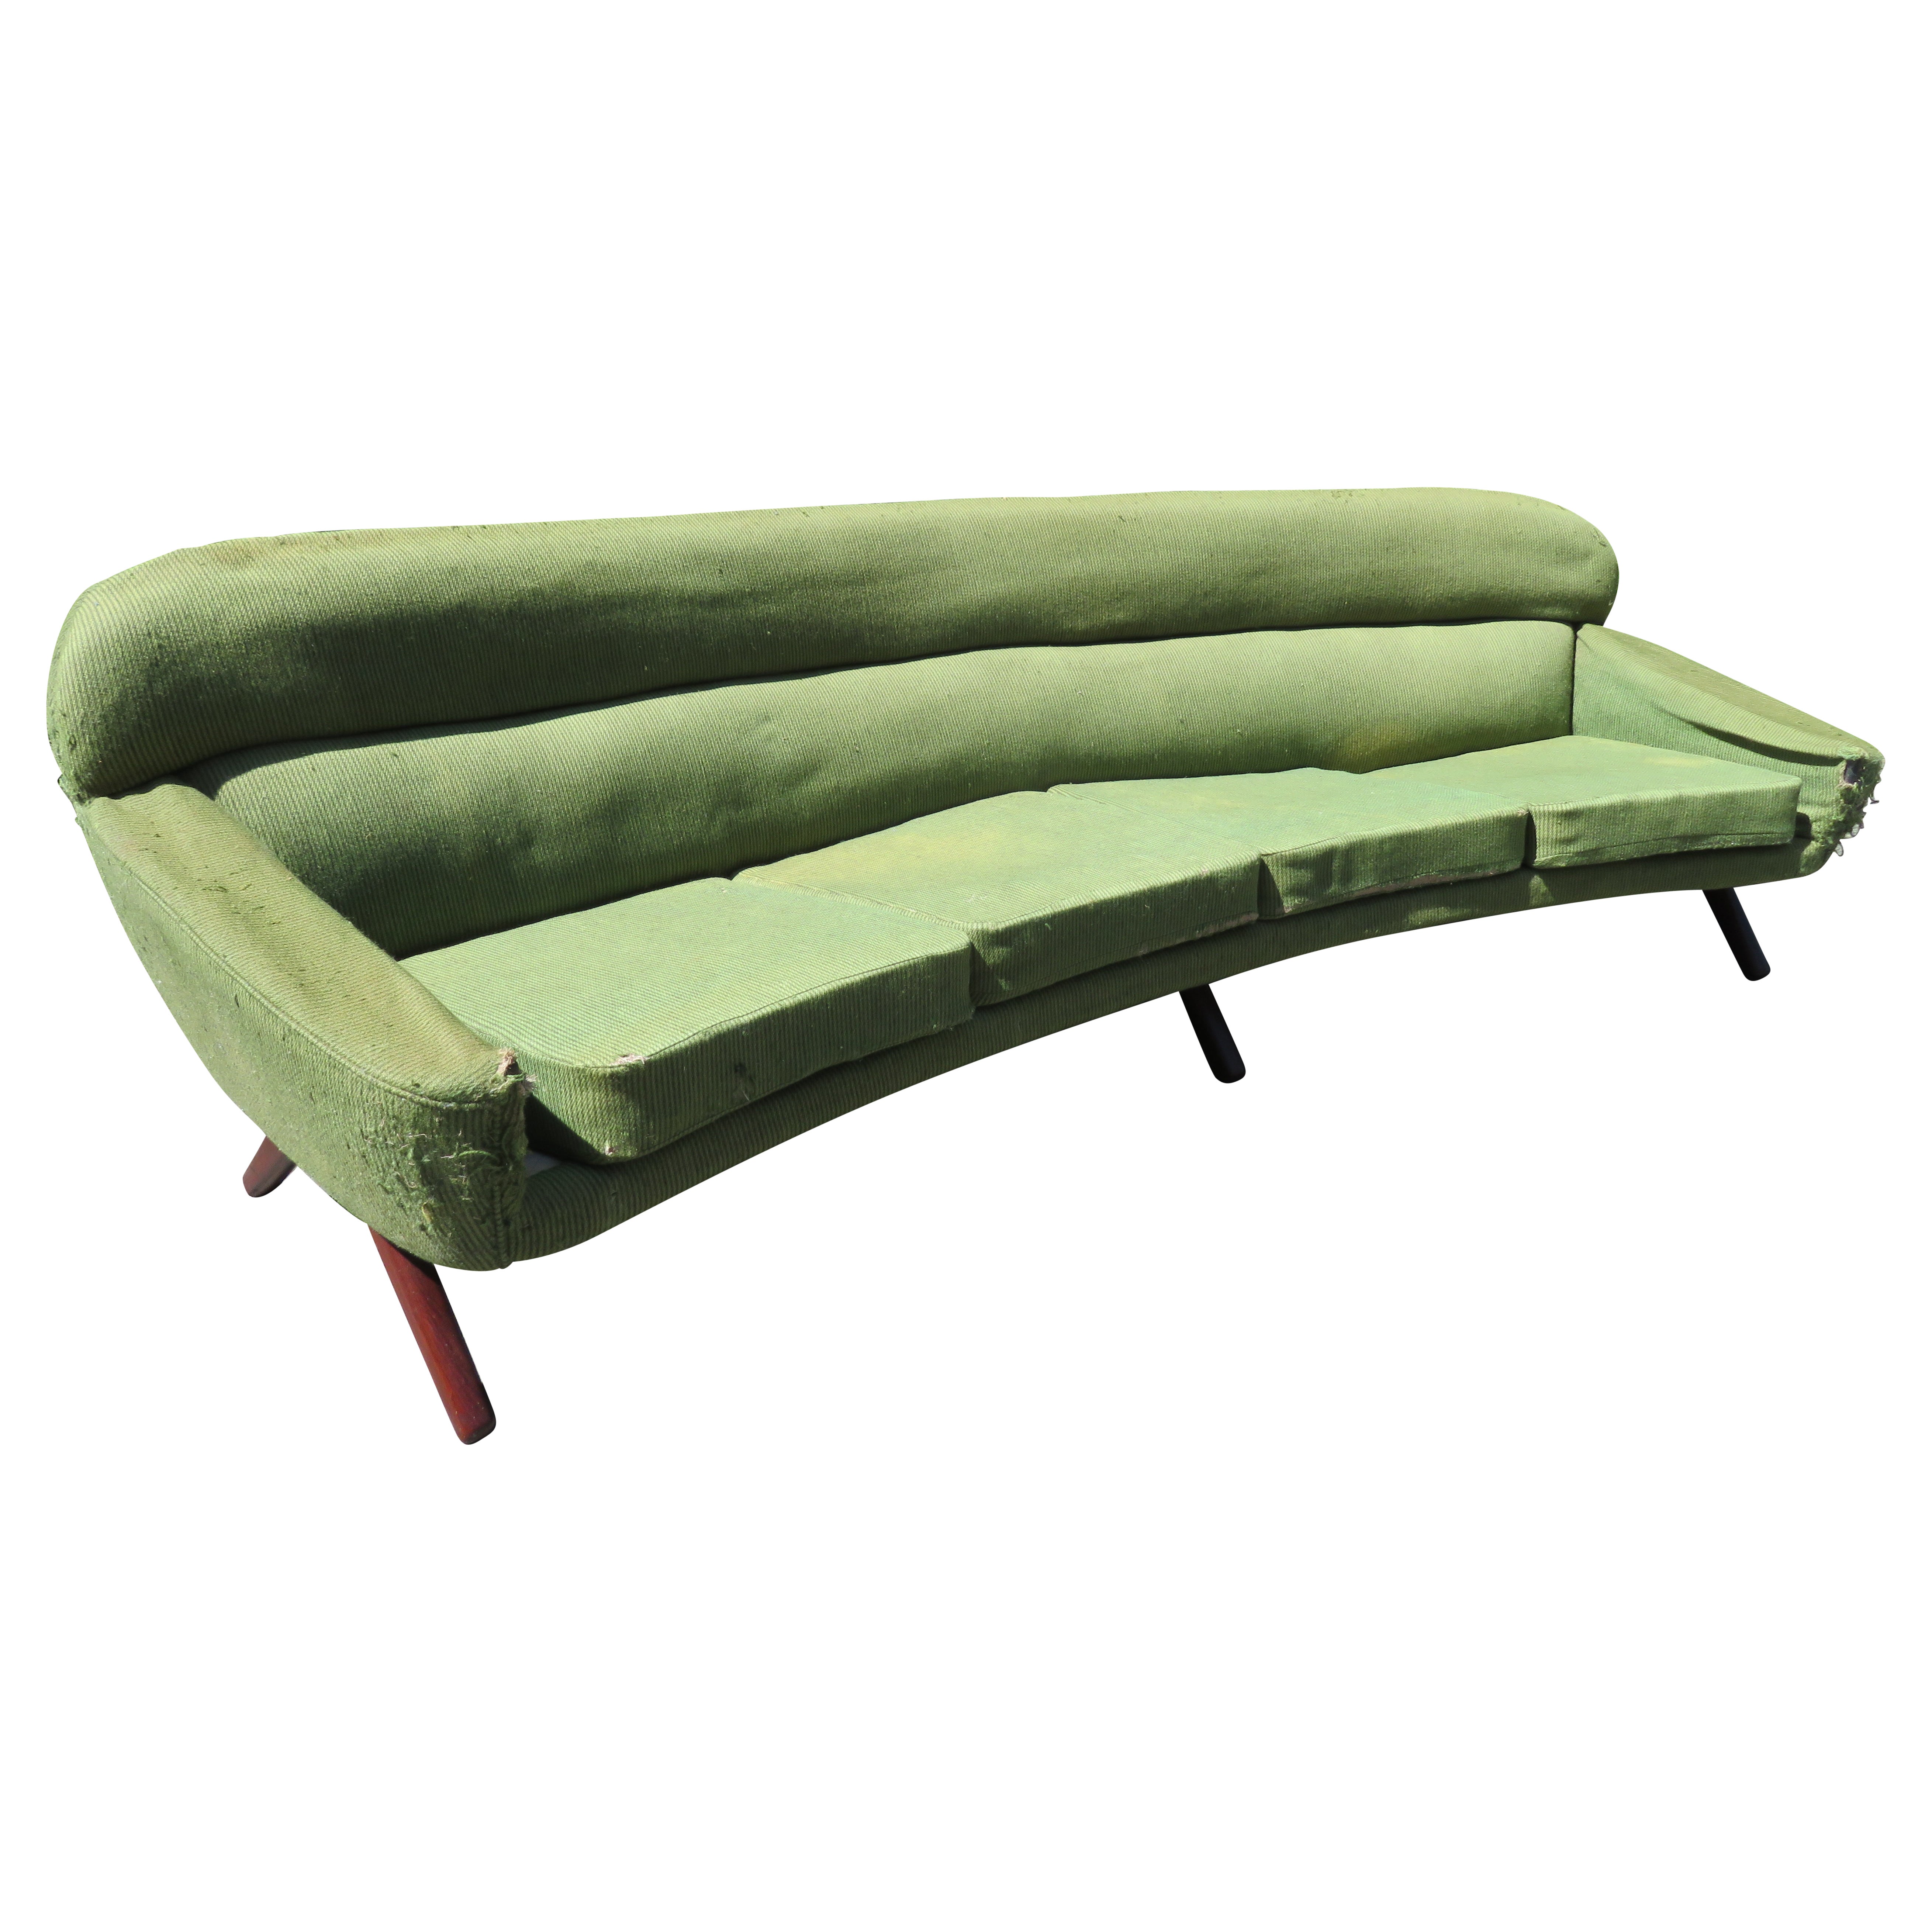 Outstanding Leif Hansen Style Curved Danish Modern Sofa Mid-Century For Sale